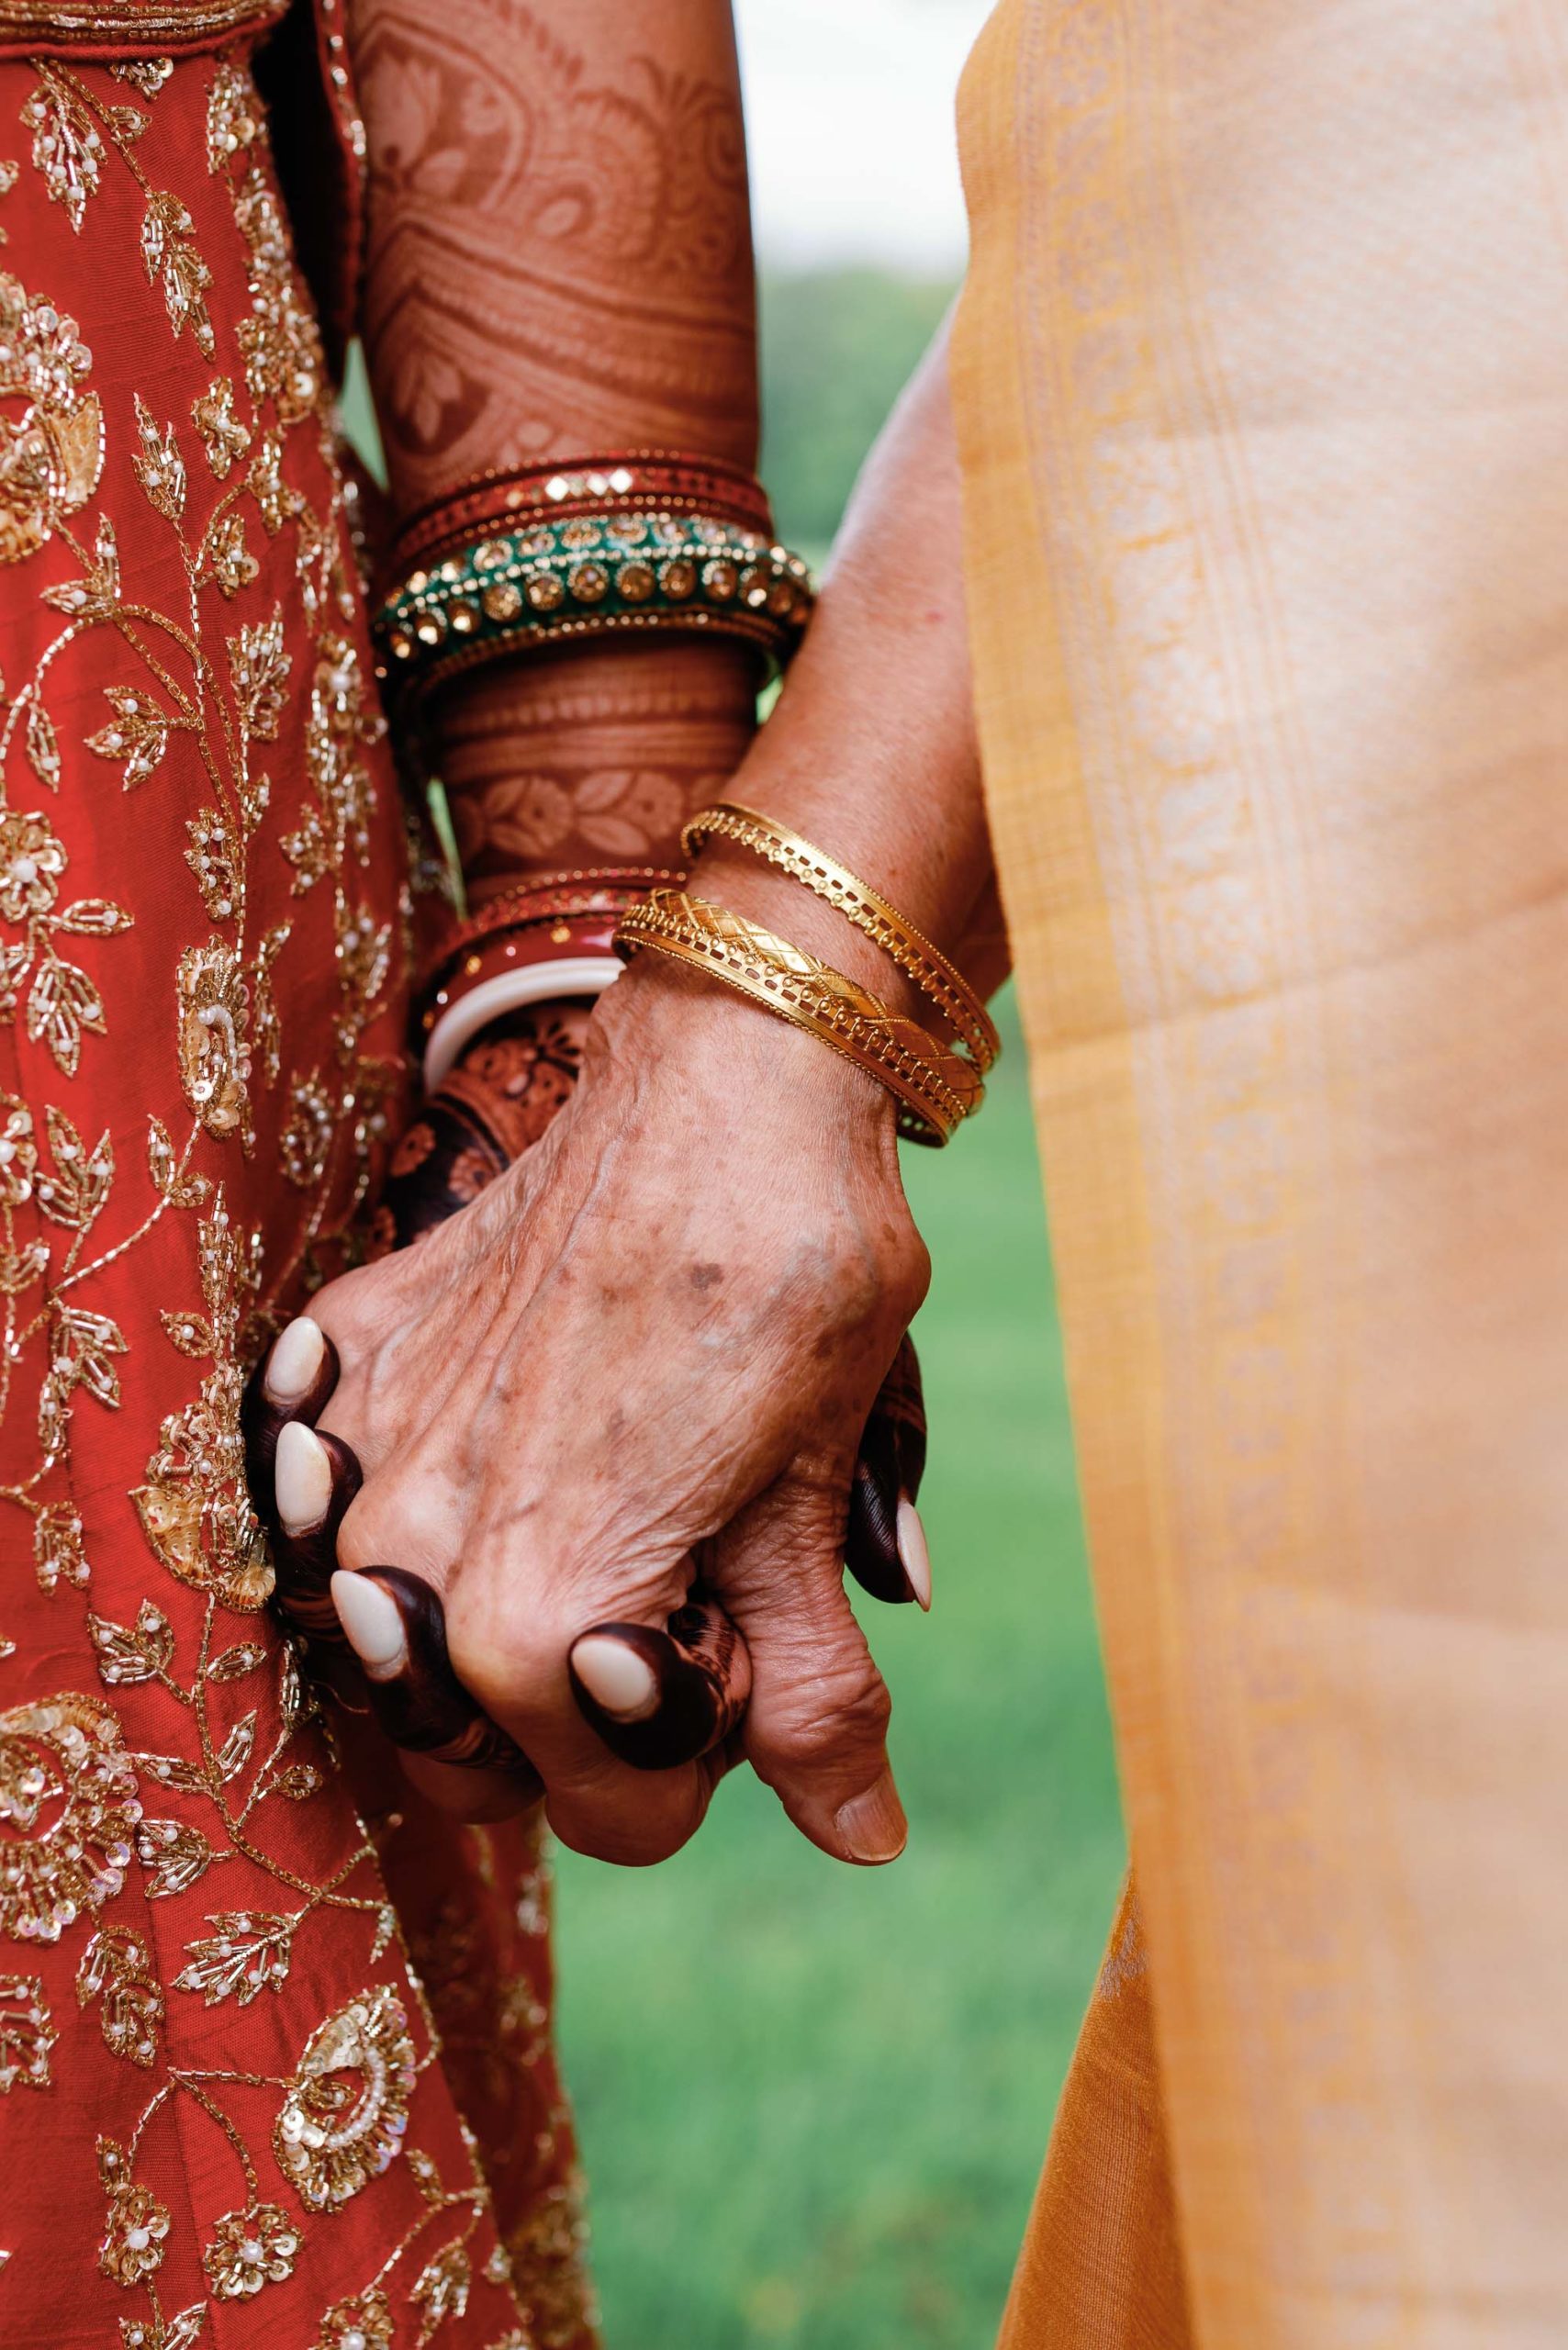 closeup of bride and grandmother holding hands in traditional Indian dress - remembering passed loved ones